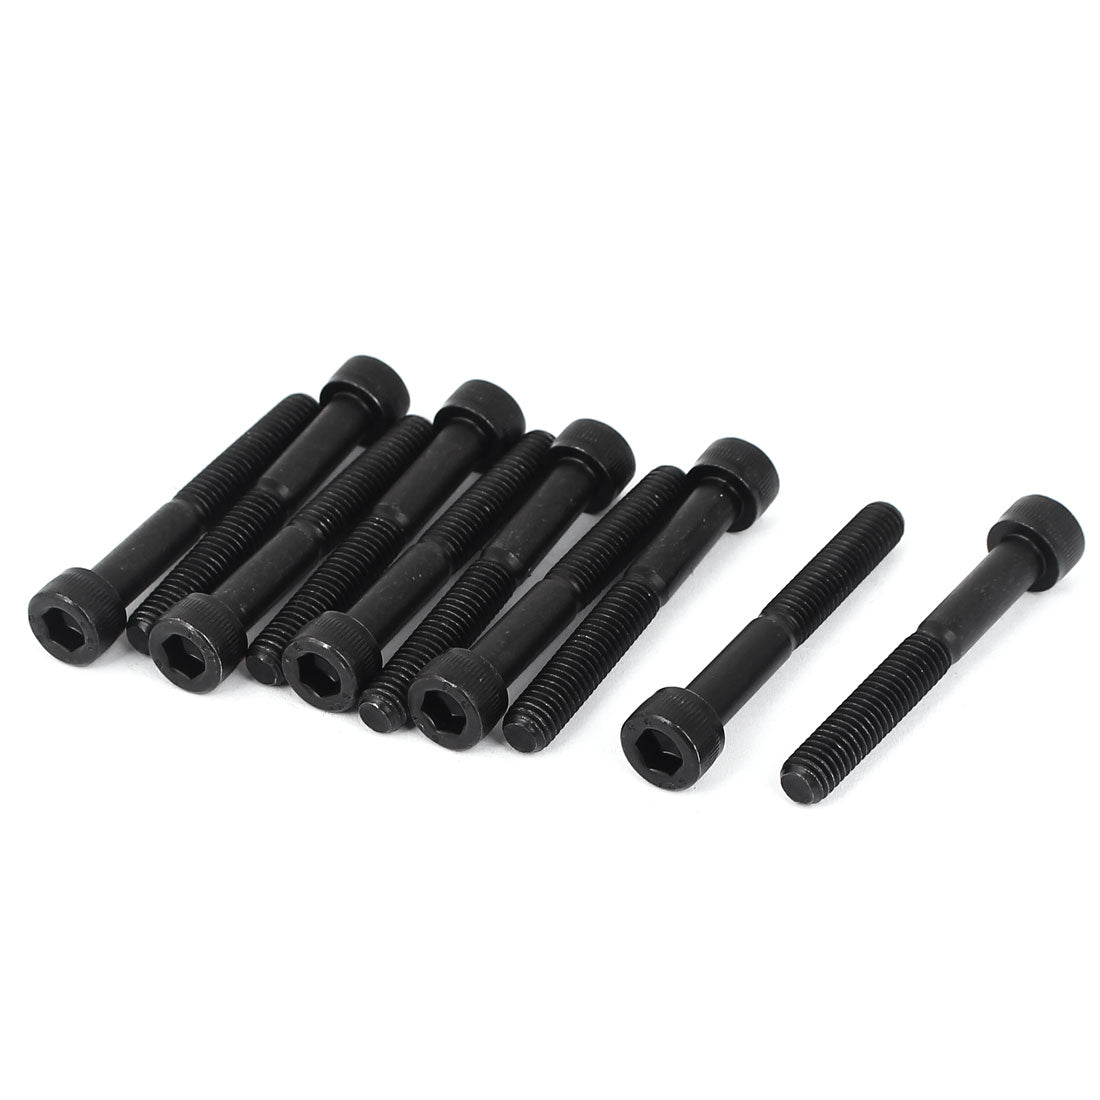 Uxcell Uxcell M6x45mm 12.9 Alloy Steel Hex Socket Screws Partially Threaded Bolts Black 10Pcs